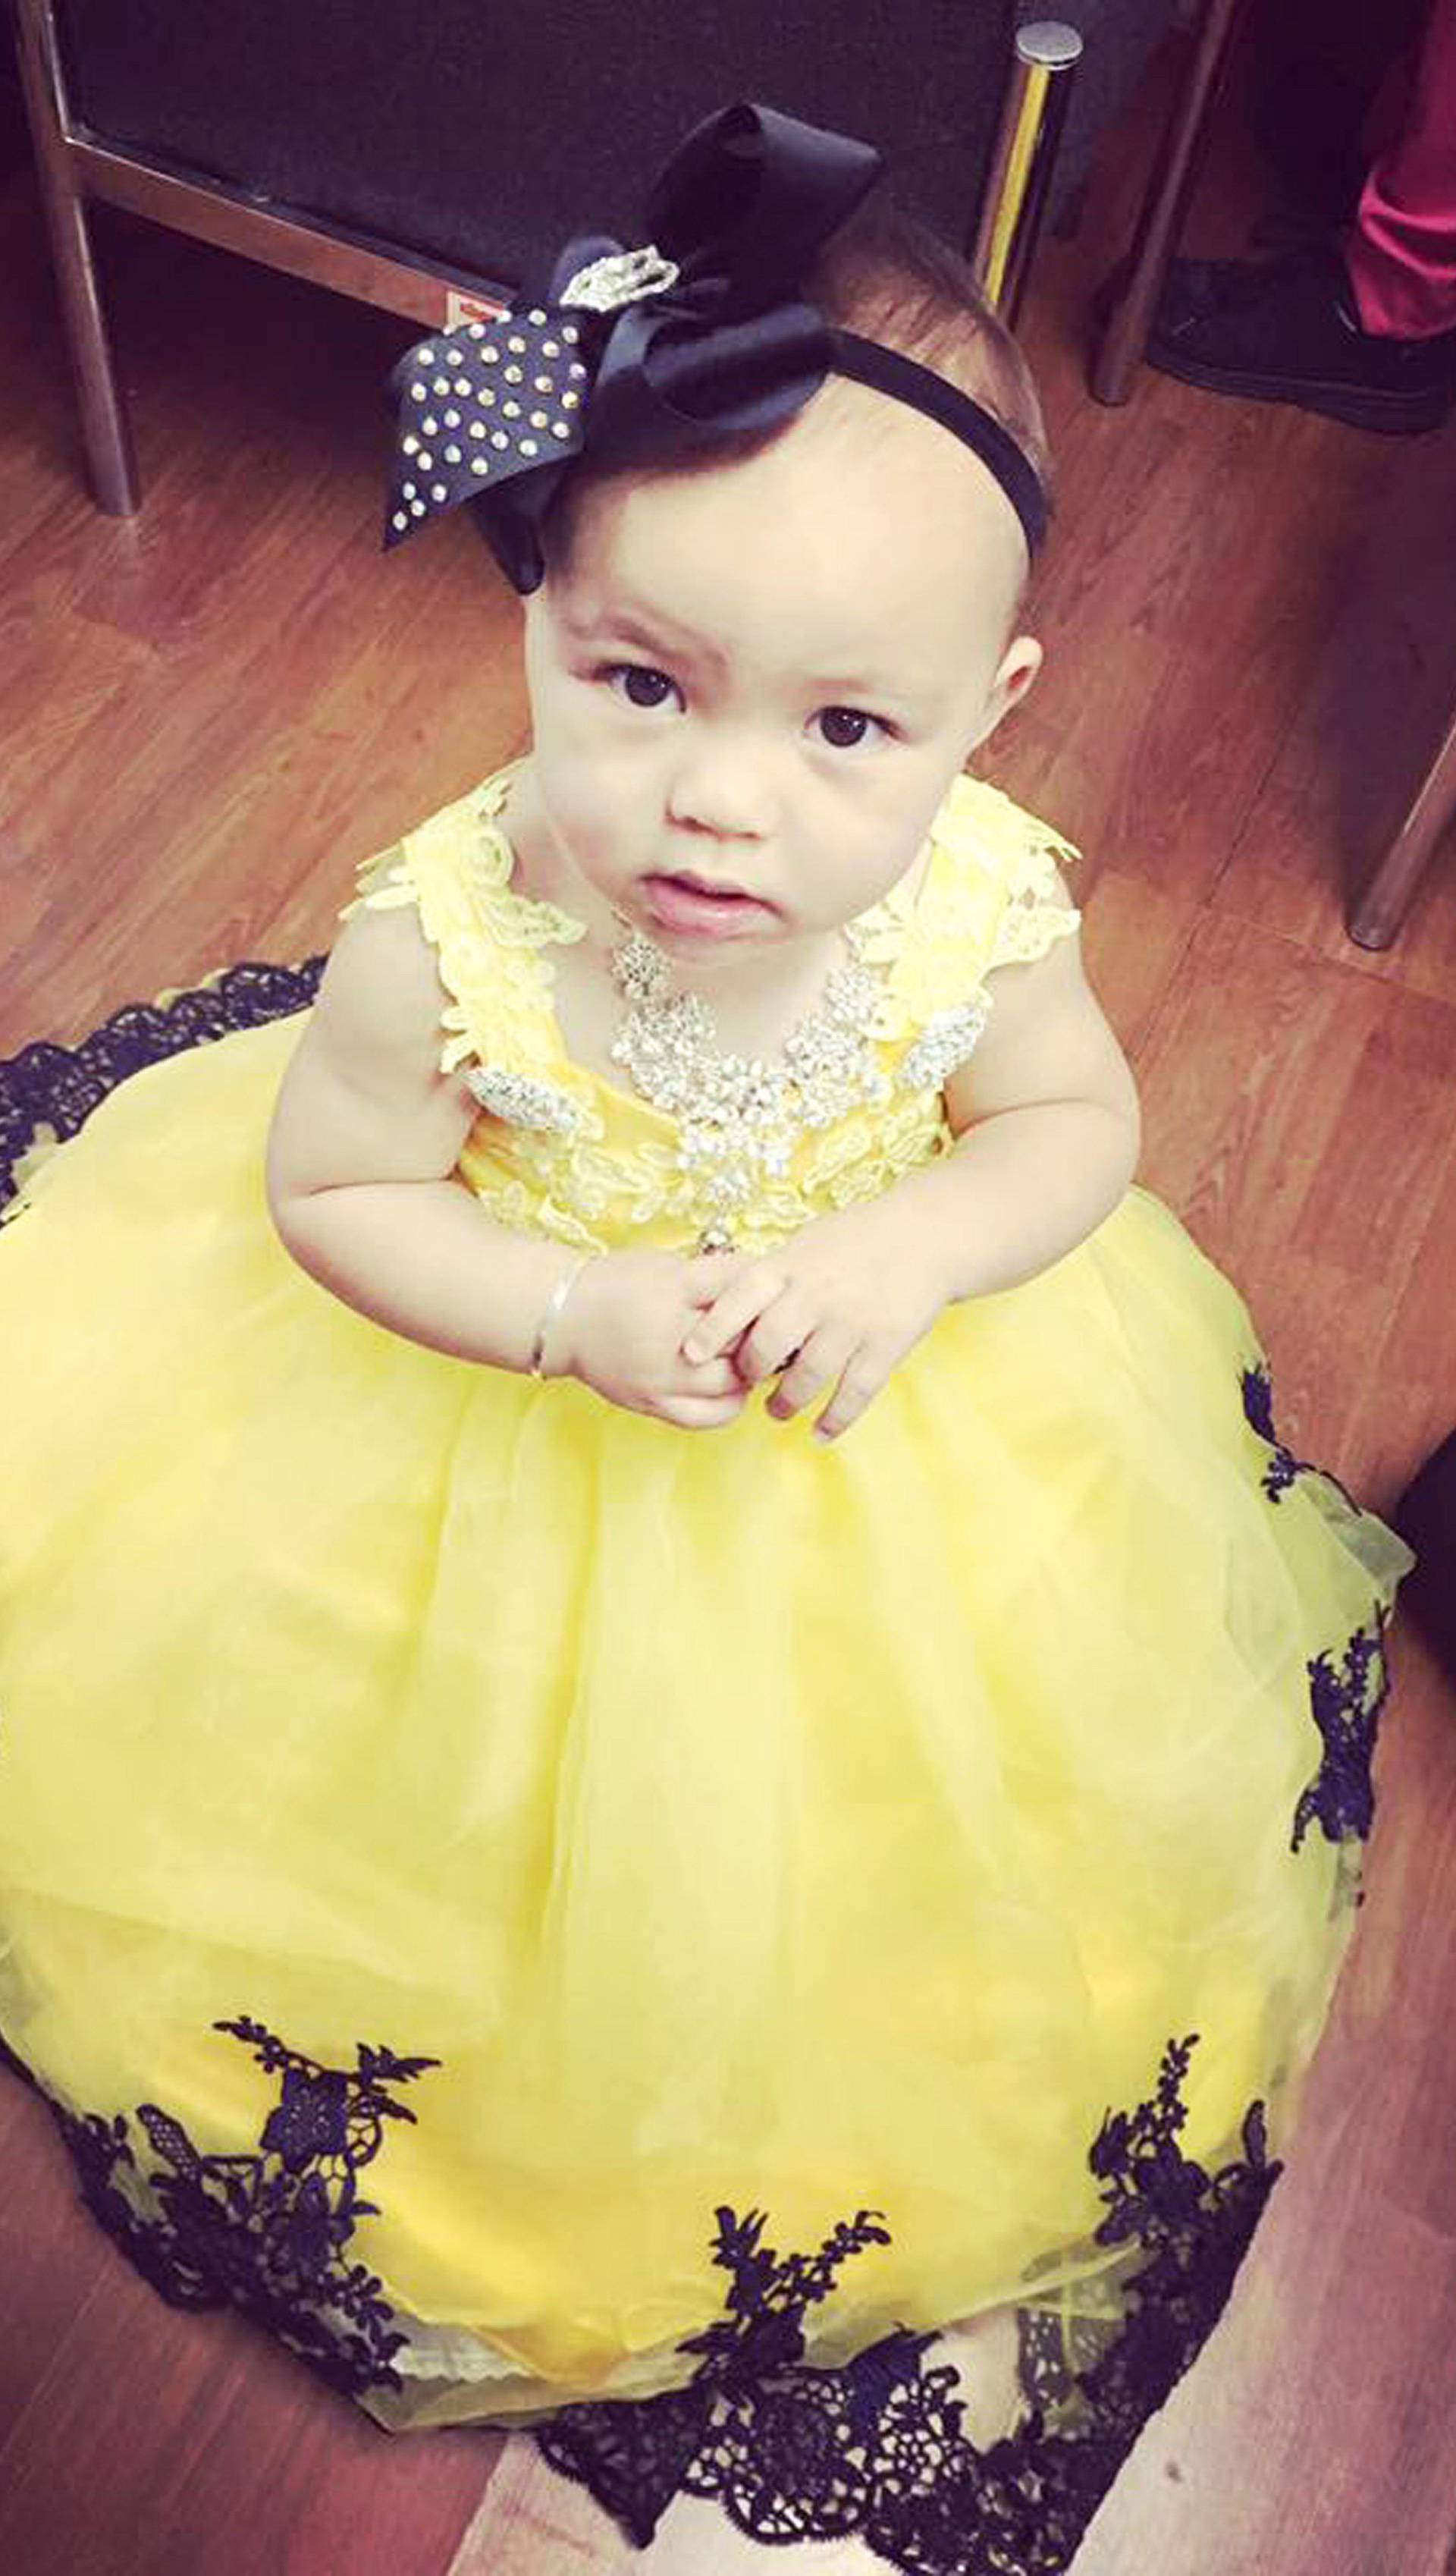 MUM REVEALS HOW BEAUTY PAGEANTS TURNED HER TWO-YEAR-OLD INTO A DIVA